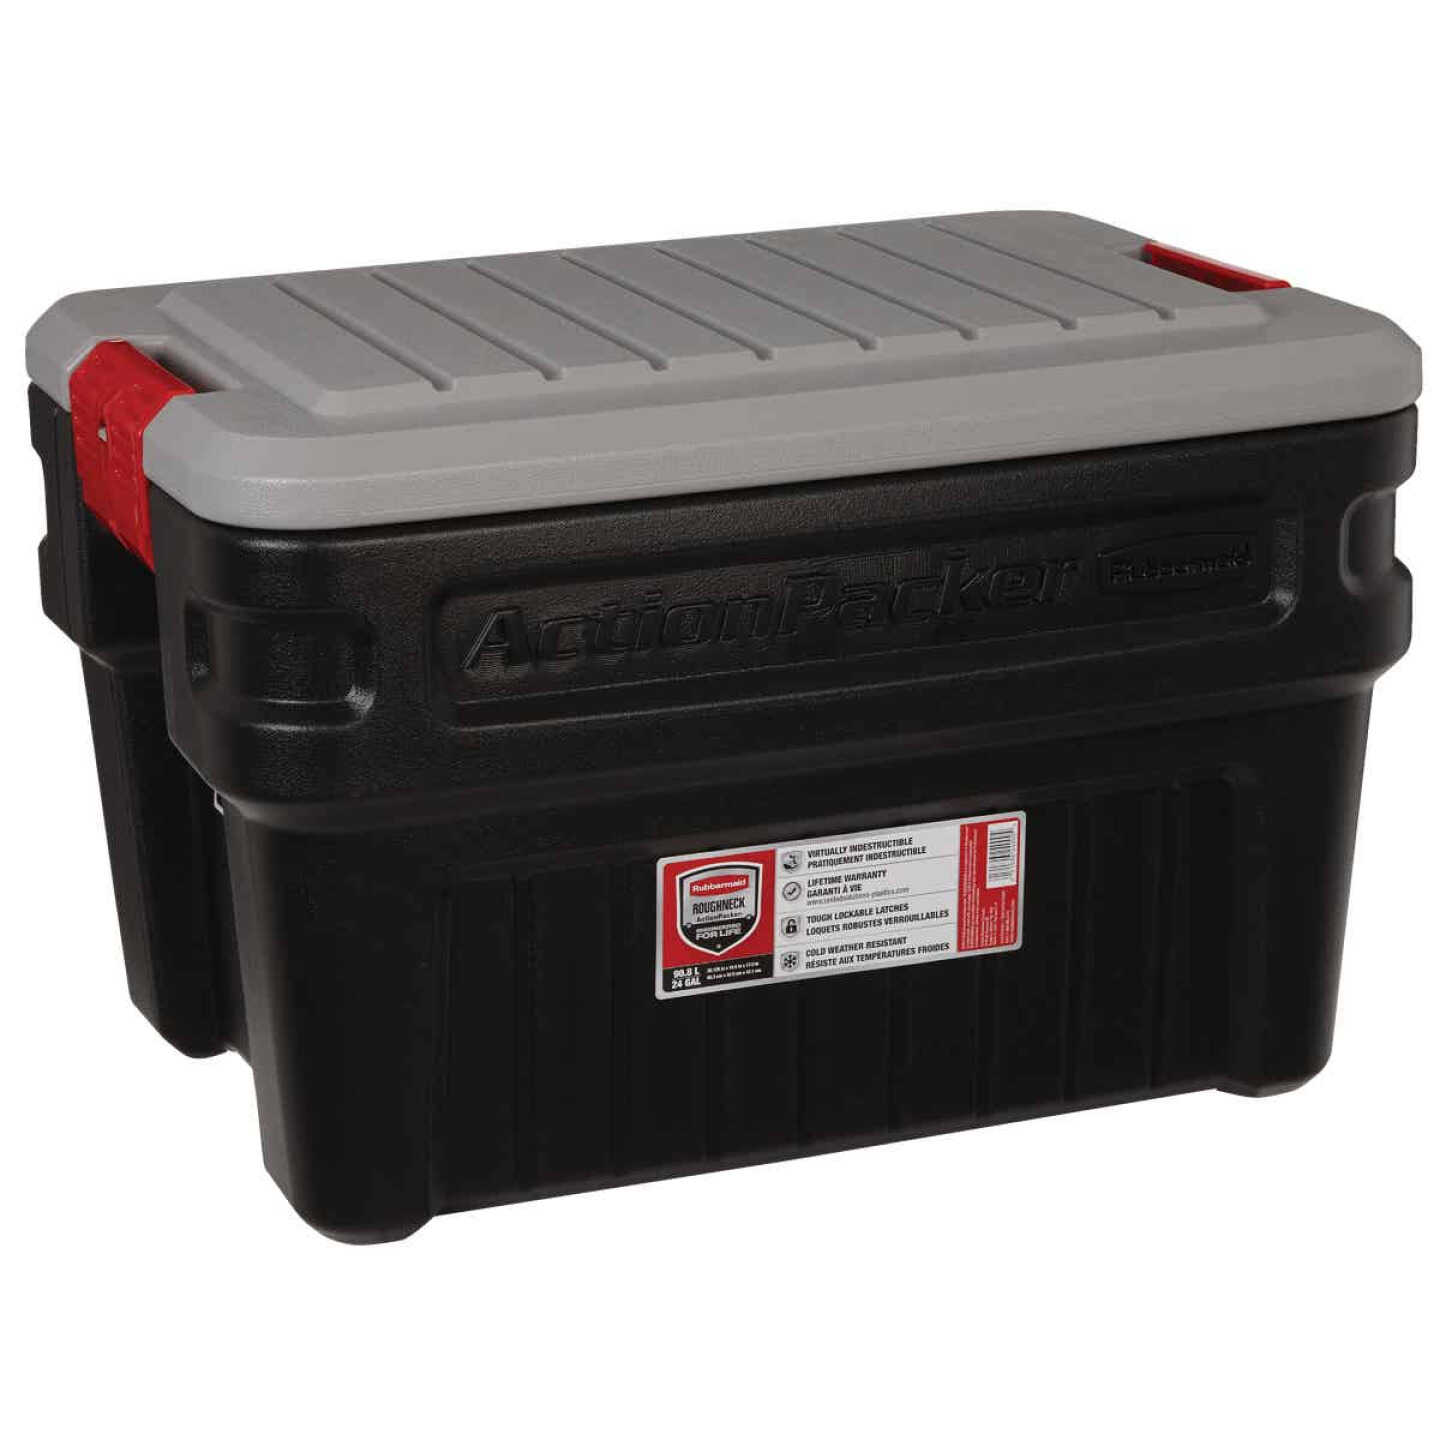 Rubbermaid 35 Gal. Action Packer Storage